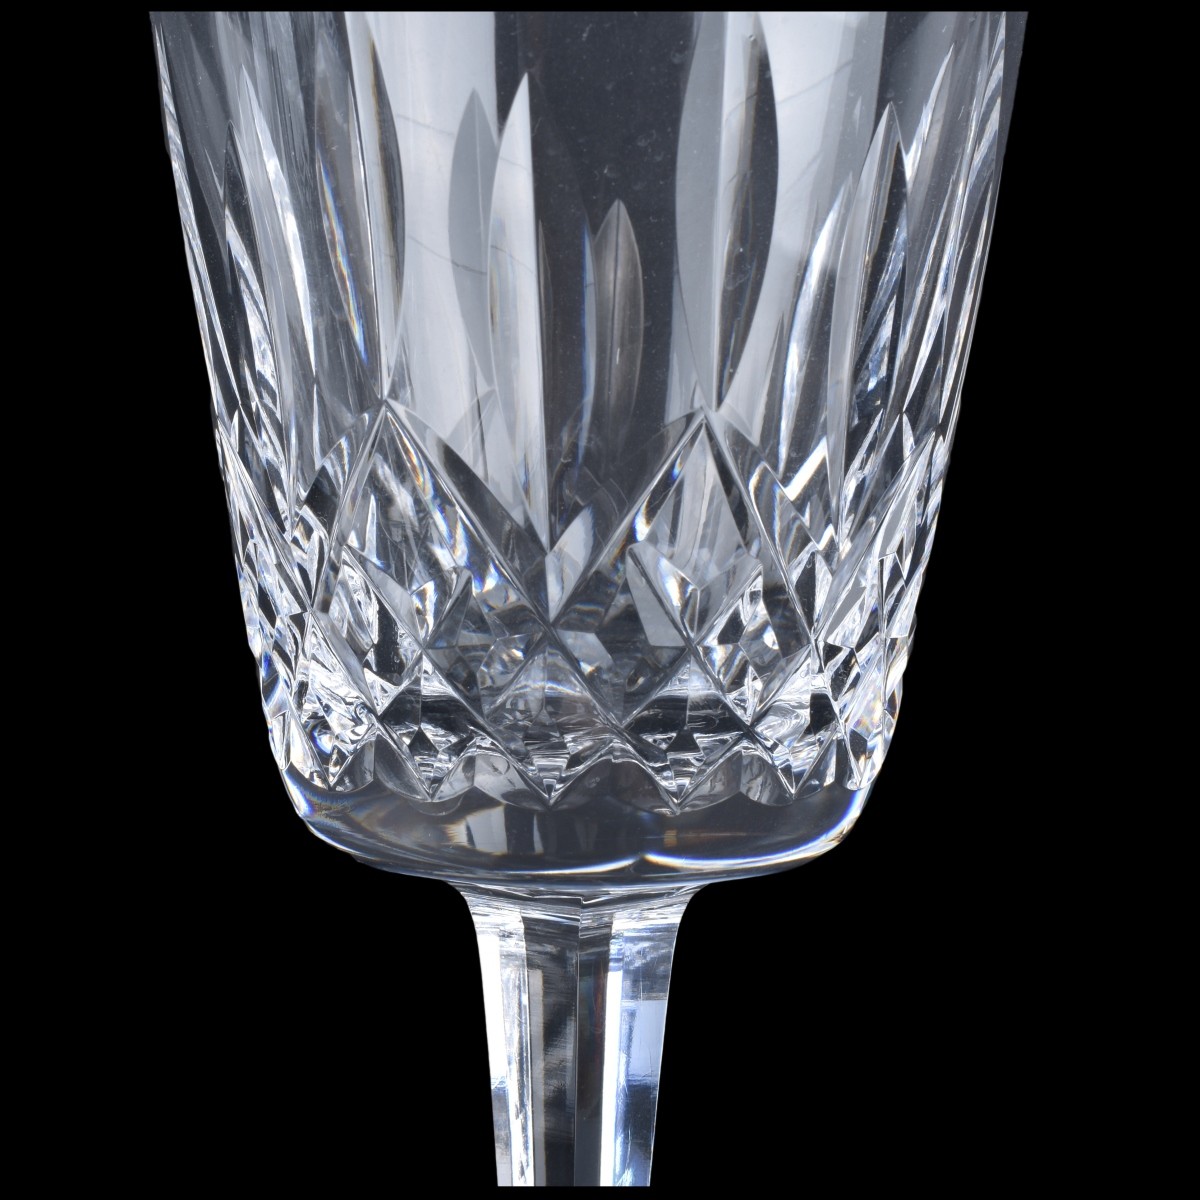 Eight (8) Waterford Crystal "Lismore" Goblets